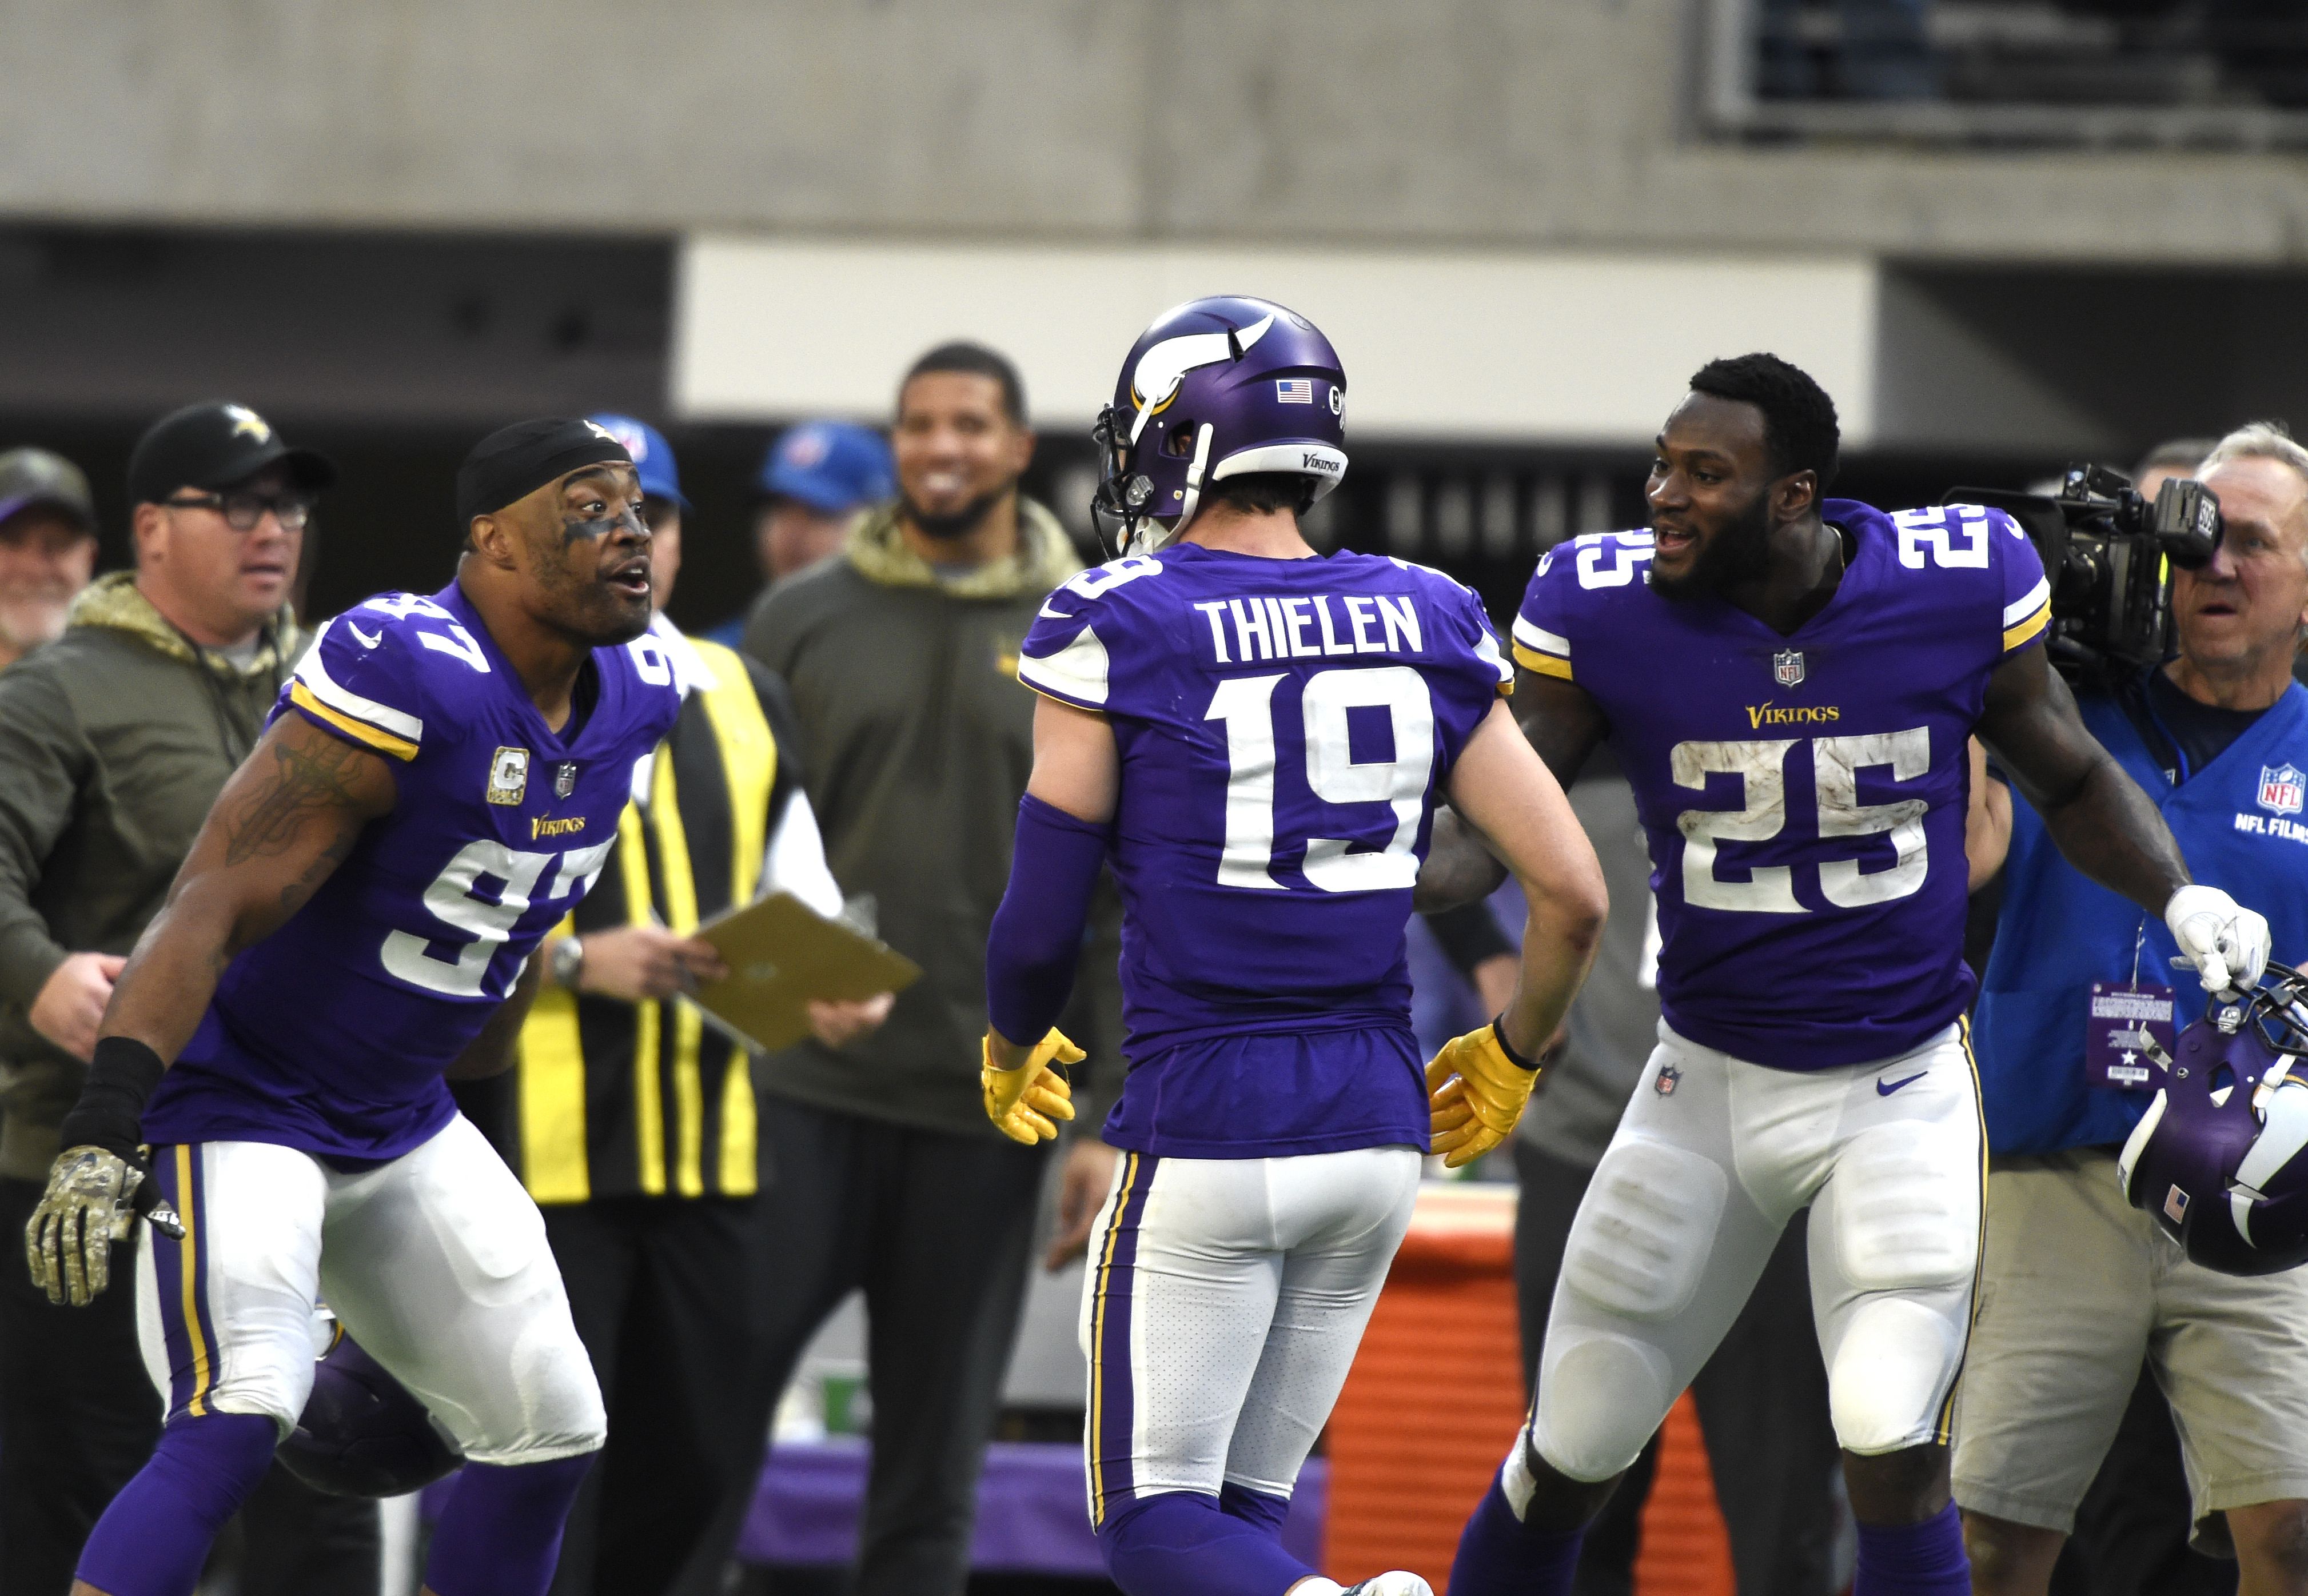 Adam Thielen deserves to be among the top candidates for the 2017